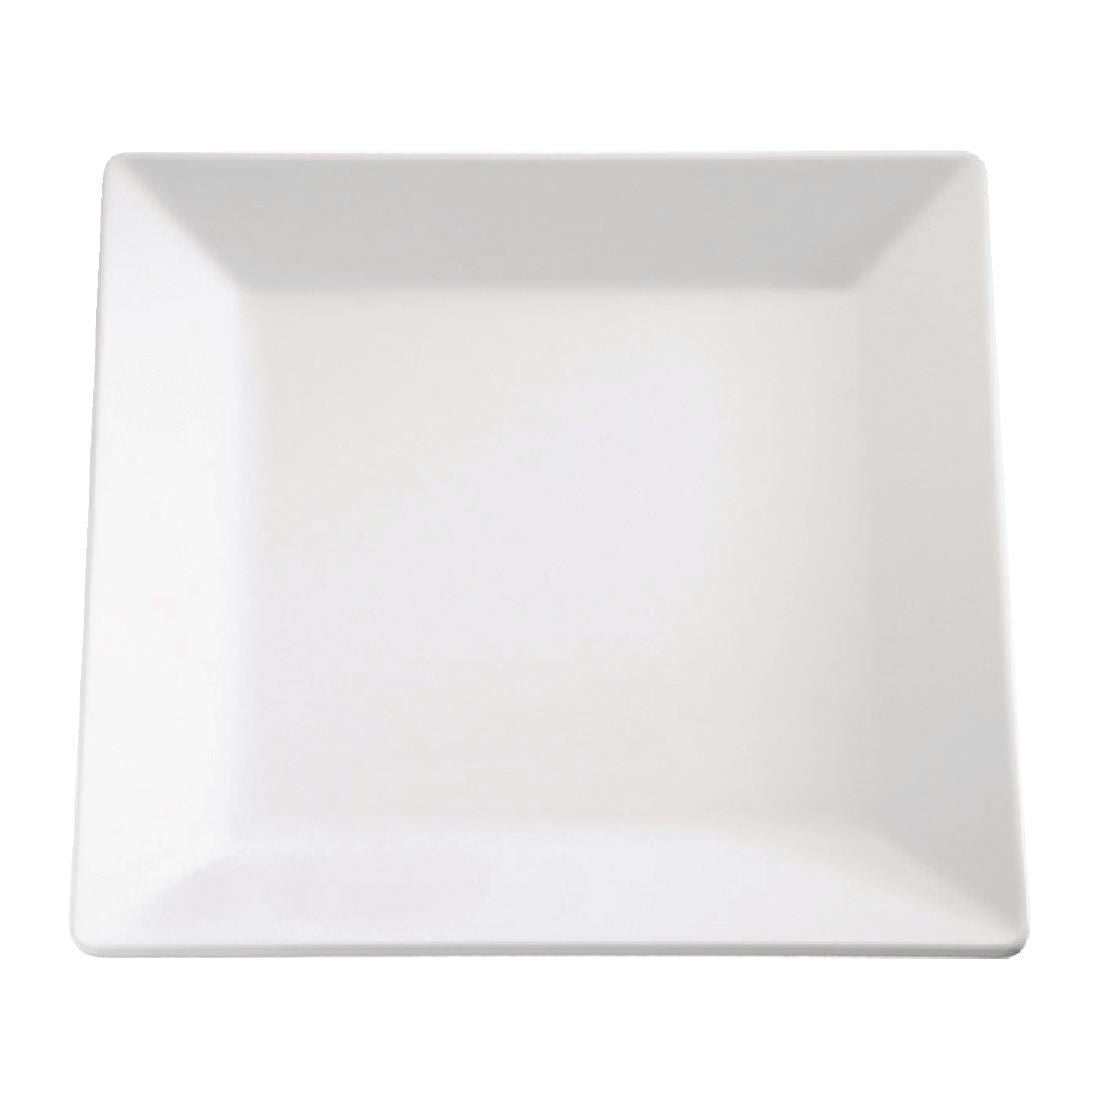 GF170 APS Pure Melamine Square Tray 7in JD Catering Equipment Solutions Ltd